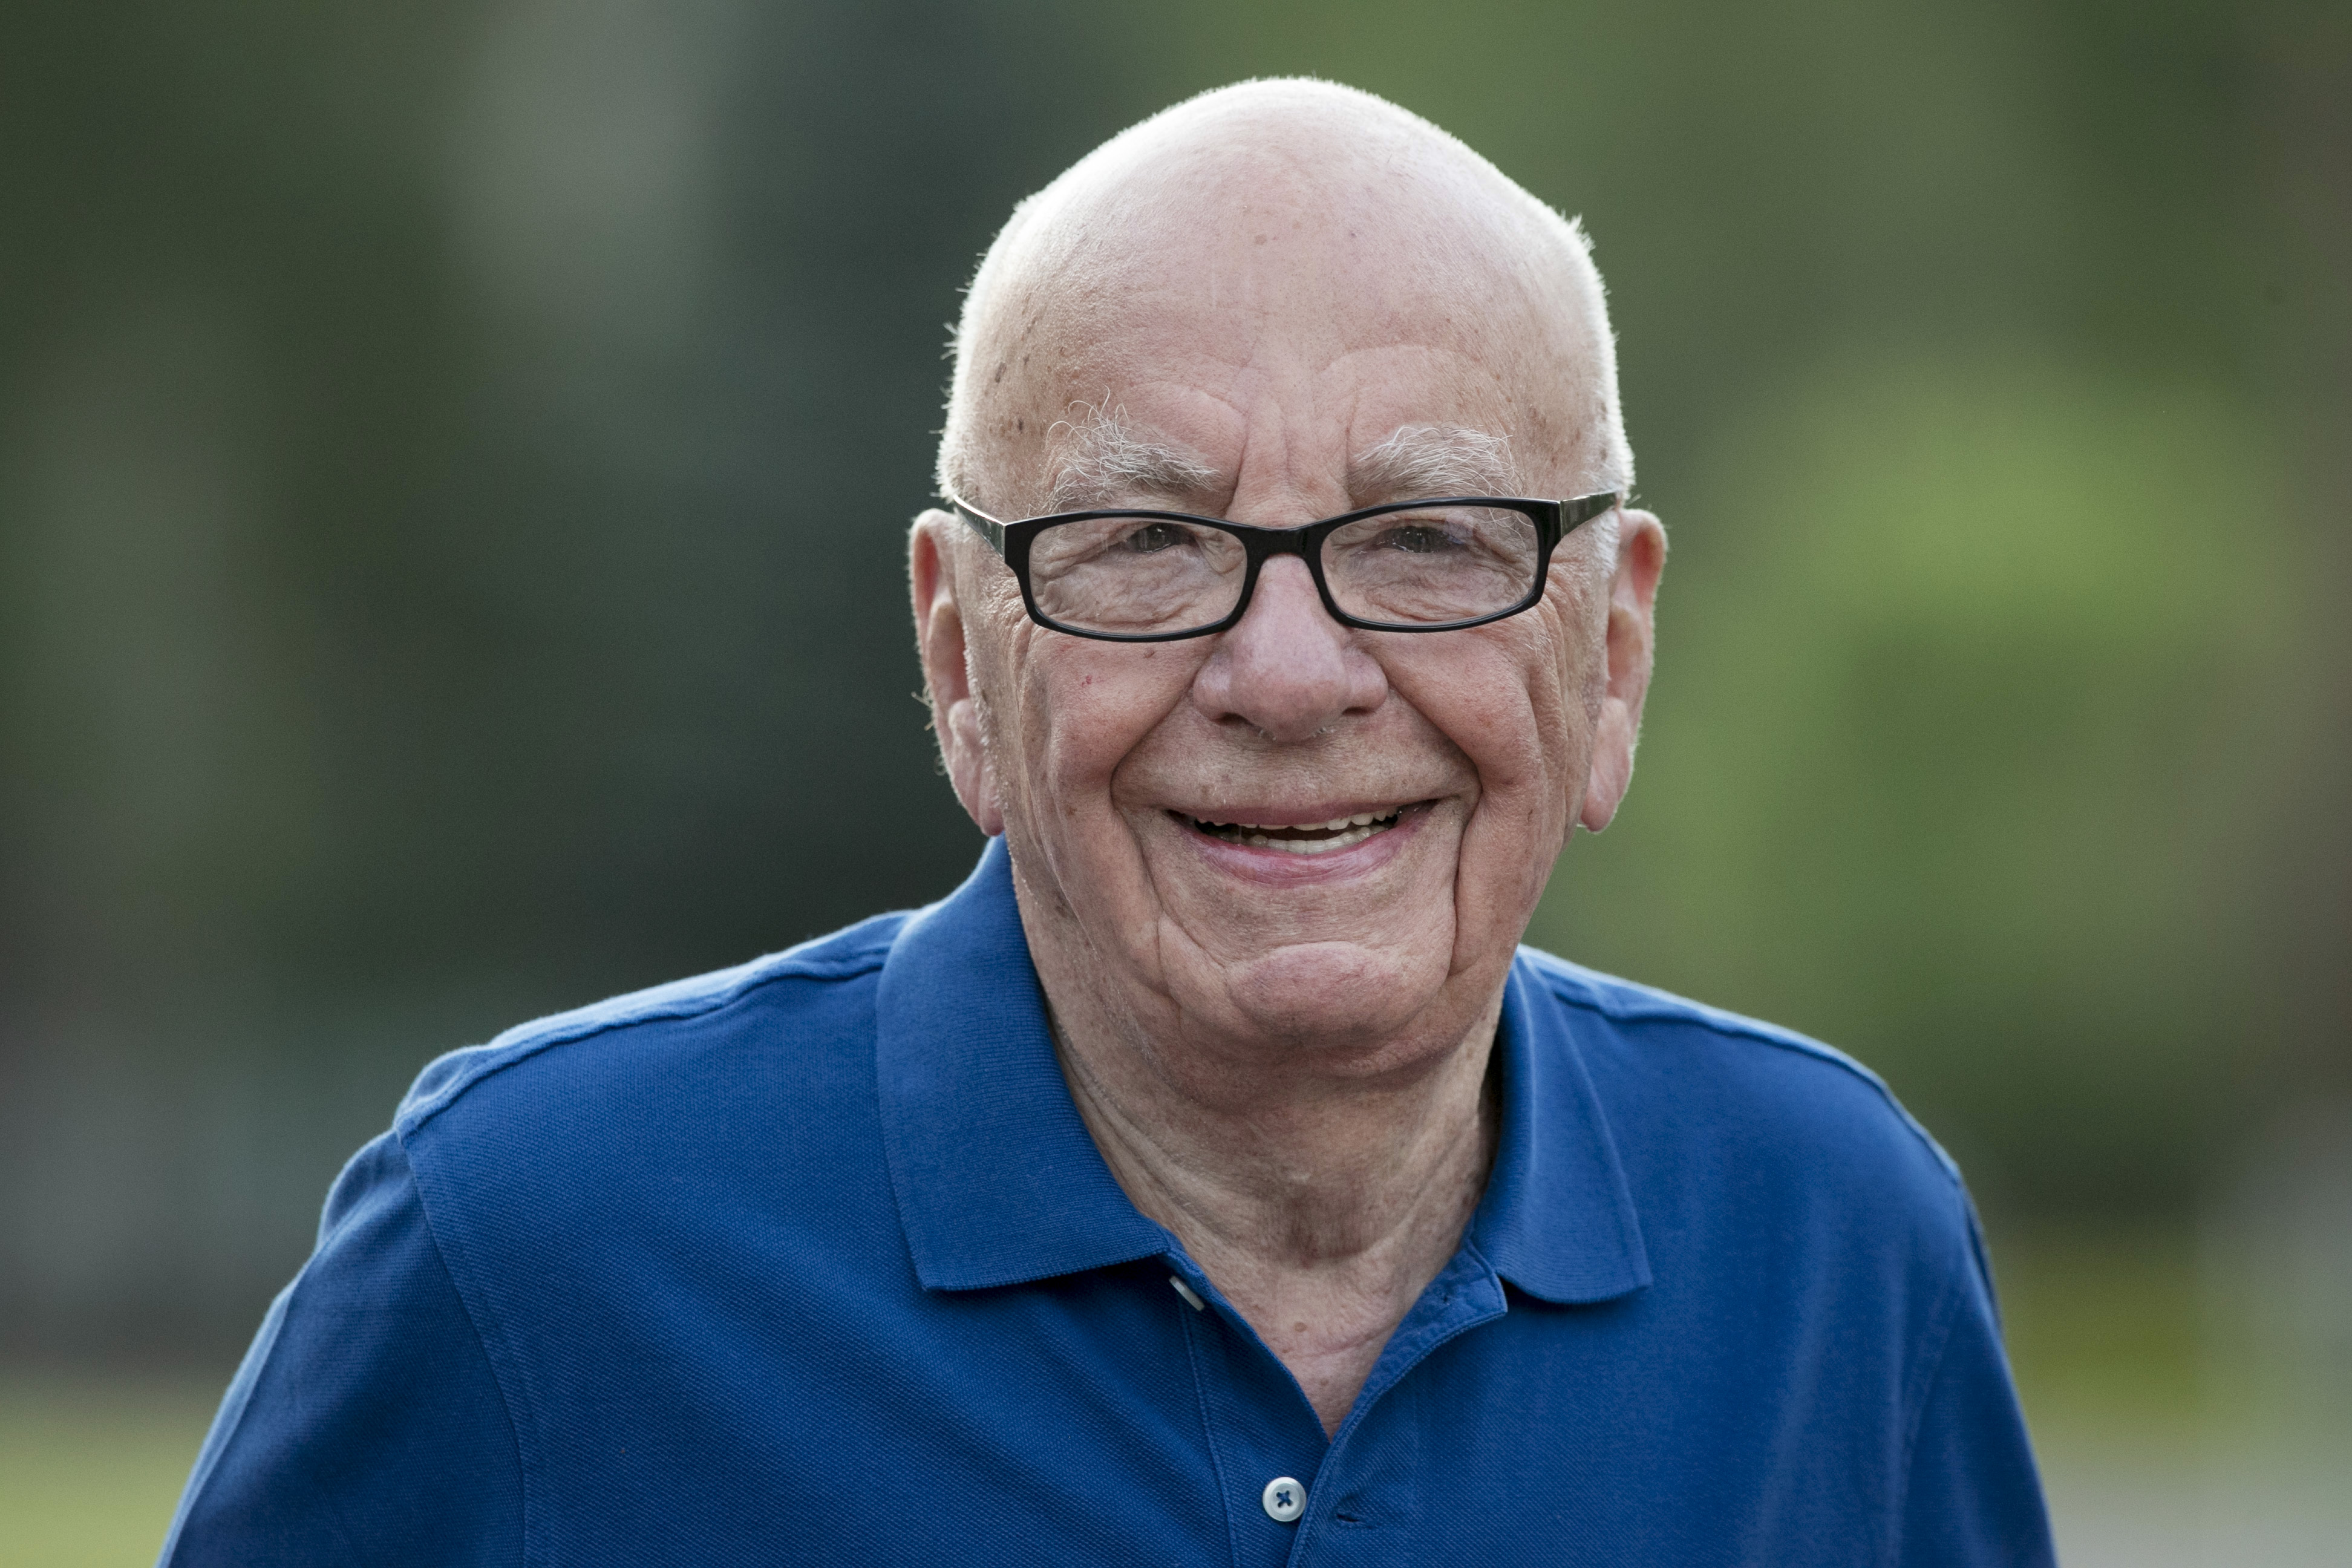 Rupert Murdoch, chairman of News Corp., arrives to a morning session at the Sun Valley Lodge during the Allen &amp; Co. Media and Technology Conference in Sun Valley, Idaho, U.S., on Wednesday, July 9, 2014. (Bloomberg&mdash;Bloomberg via Getty Images)